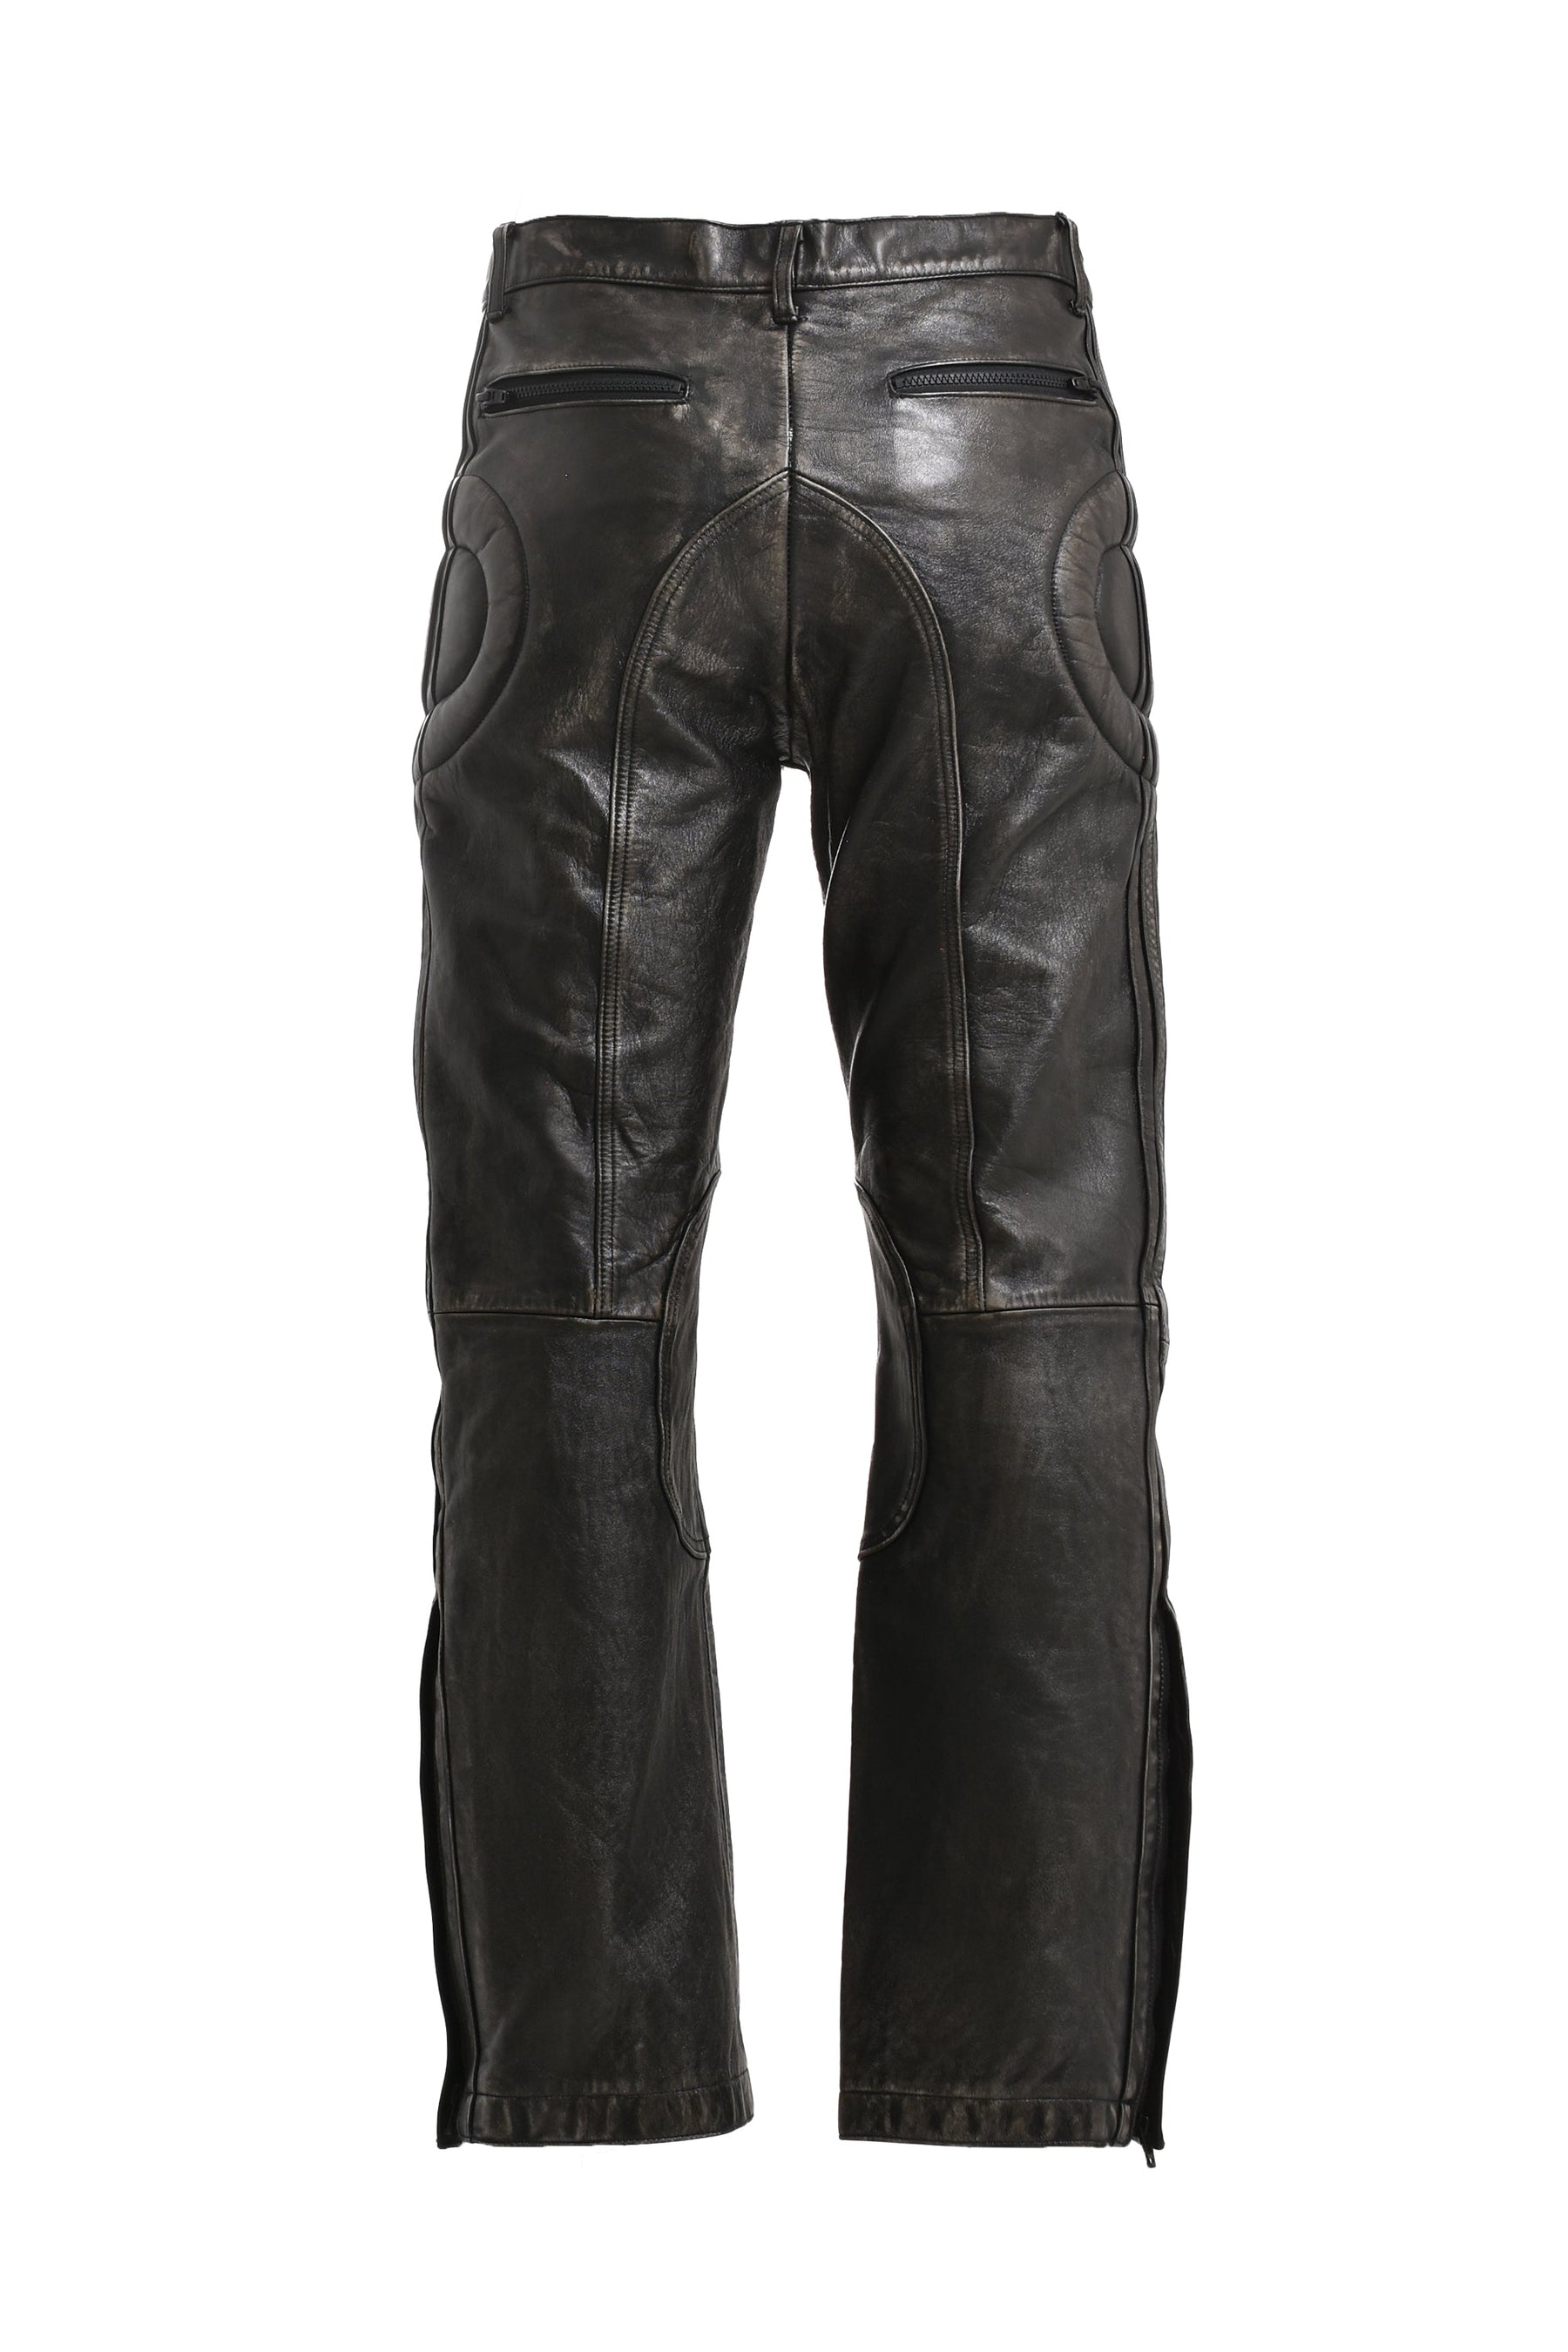 READYMADE LEATHER PANTS / BLK